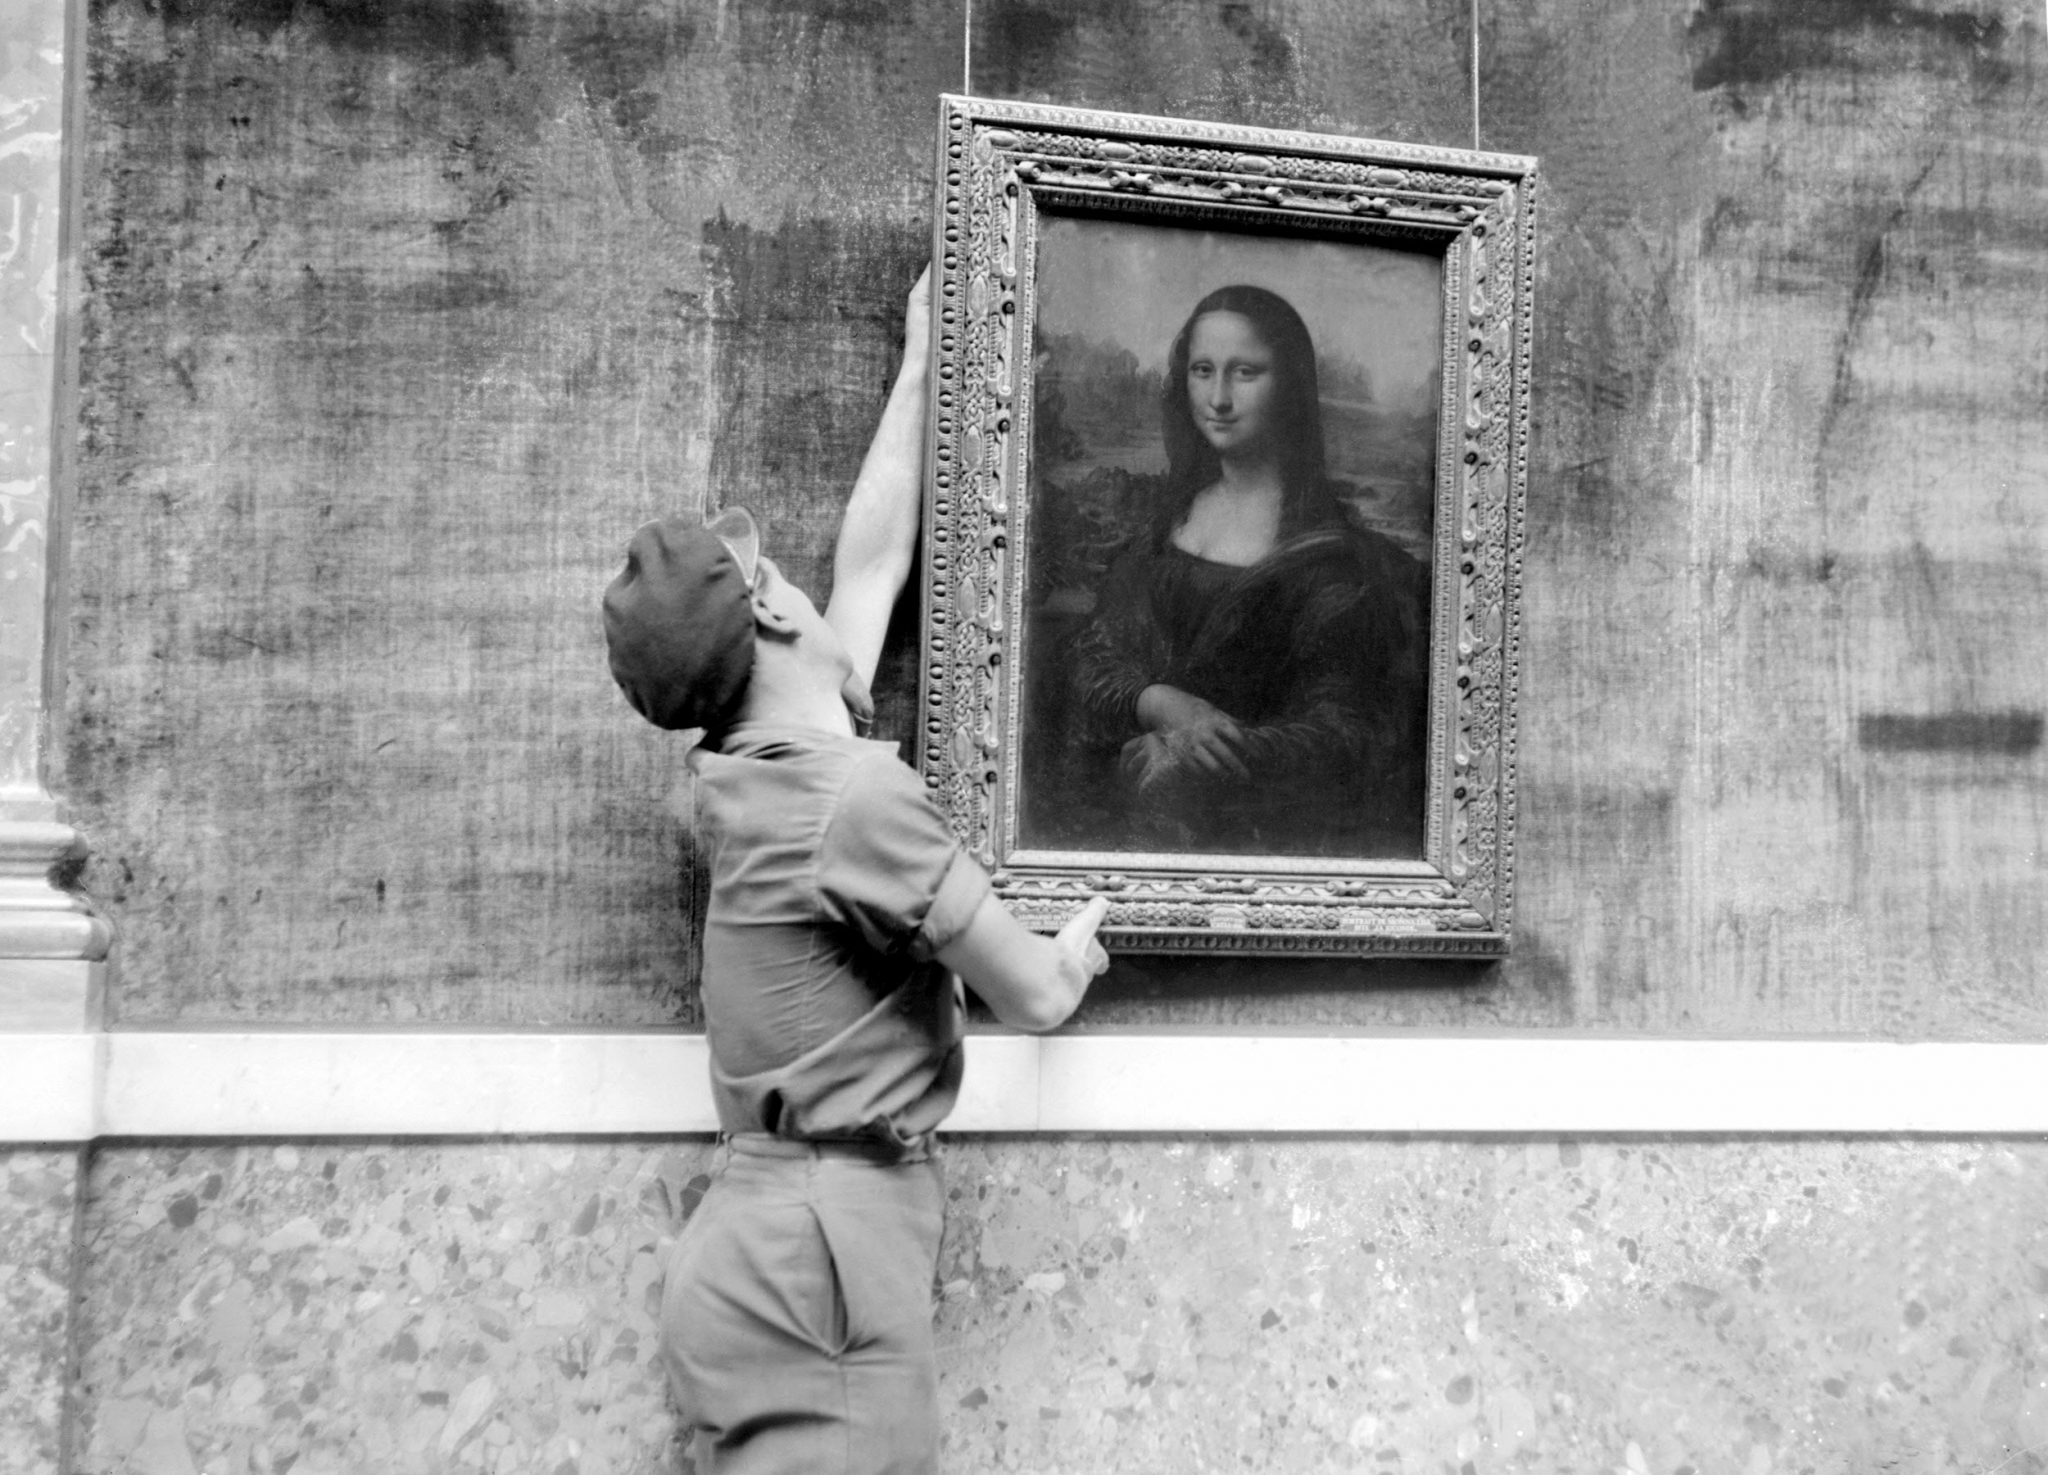 PARIS, FRANCE: An employee of the Louvre museum in Paris, France hangs the famous "Mona Lisa" painting, by Leonardo da Vinci, (1452-1519), 6 October 1947, during the re-opening of the Grand Gallery of the Louvre, which had been closed for two years following the end of World War II. AFP PHOTO (photo credit should read AFP/Getty Images)